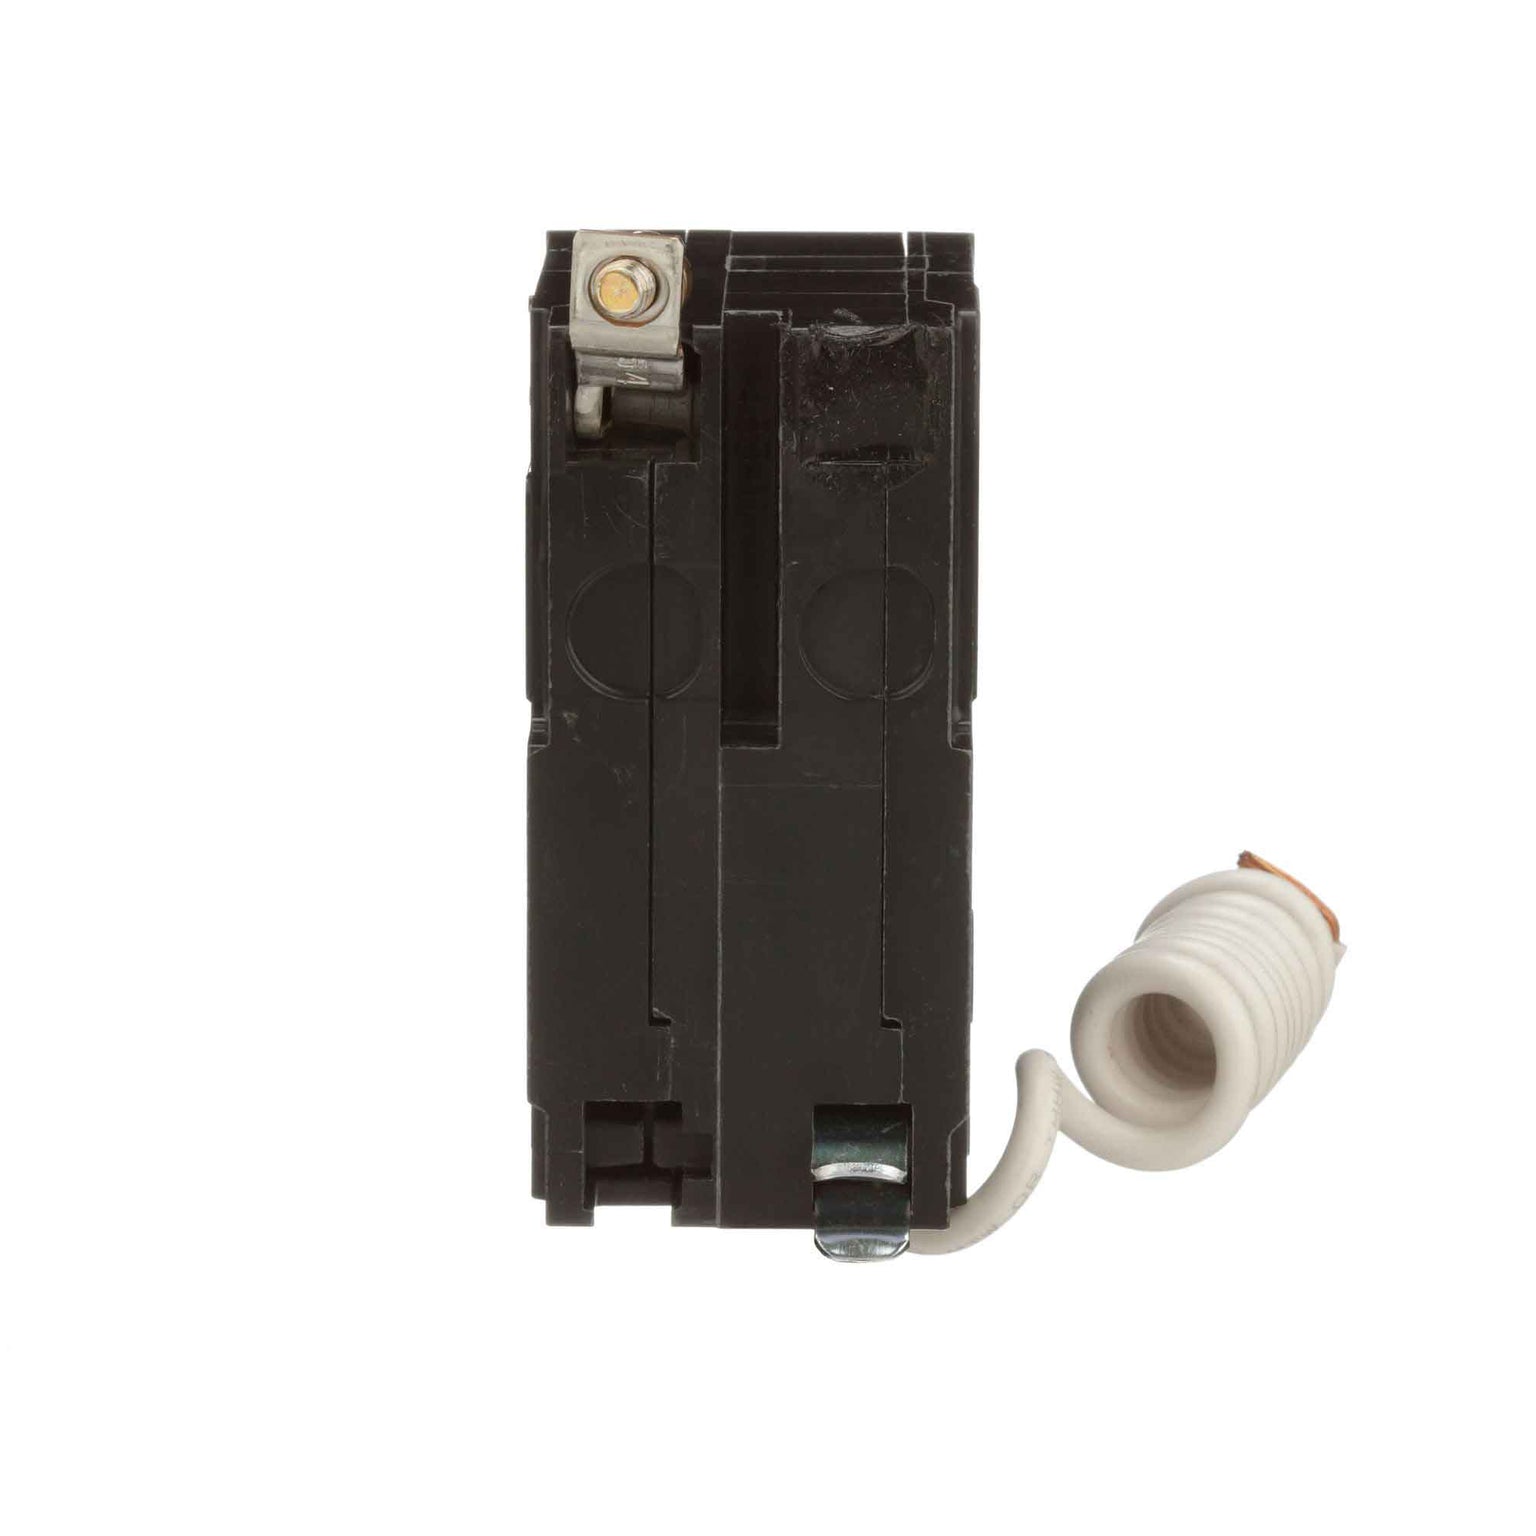 QOB220SWN - Square D - Molded Case Circuit Breakers